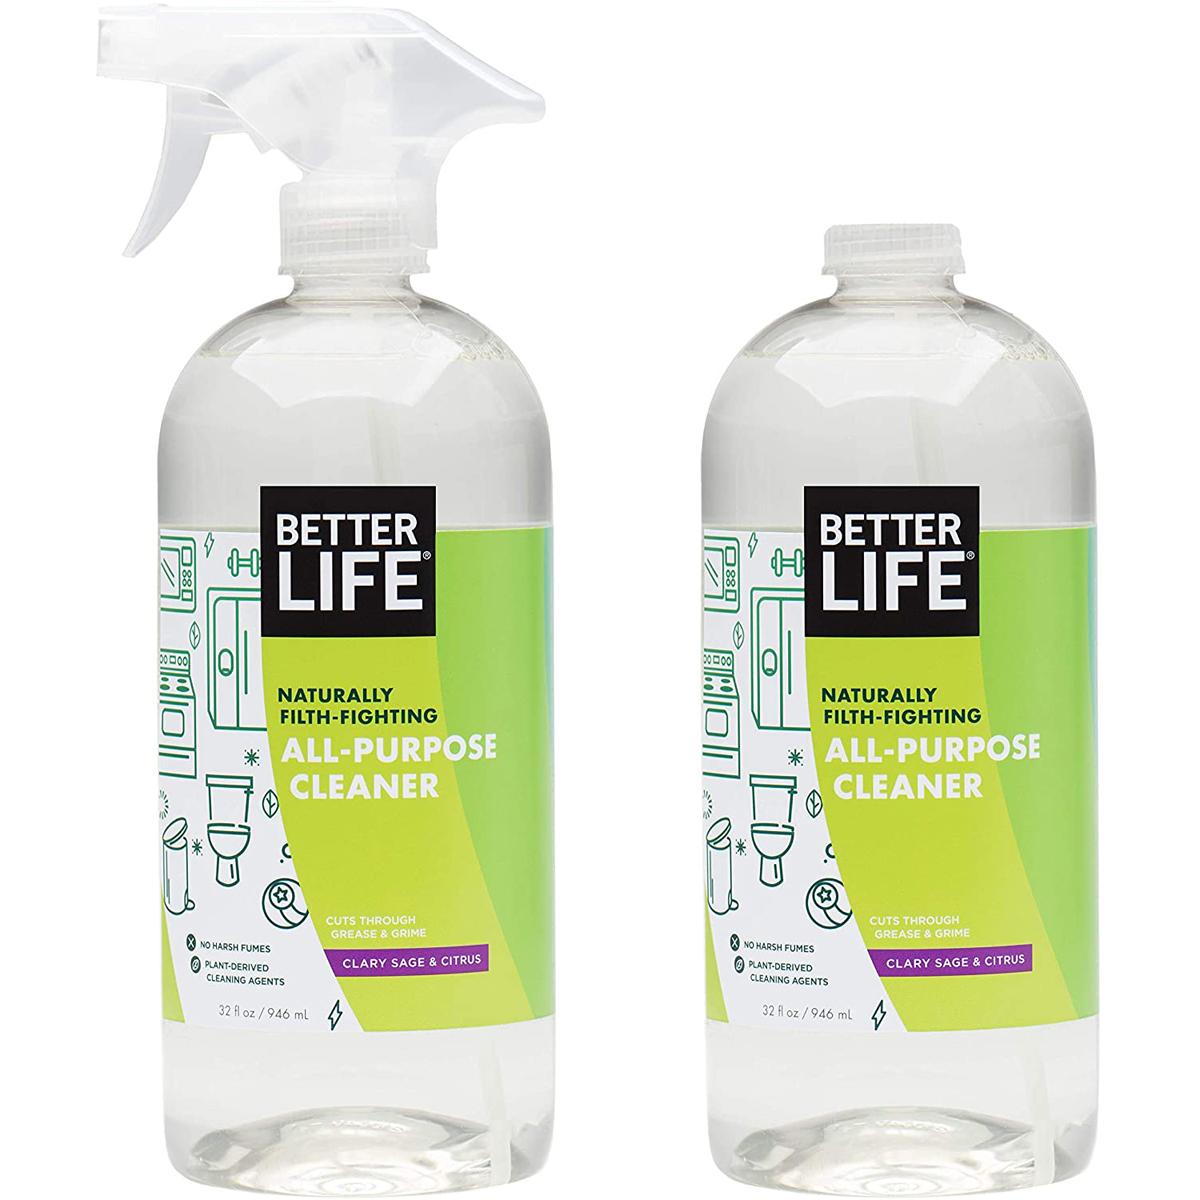 2 32oz Better Life Natural All-Purpose Pet-Safe Cleaner for $12.34 Shipped